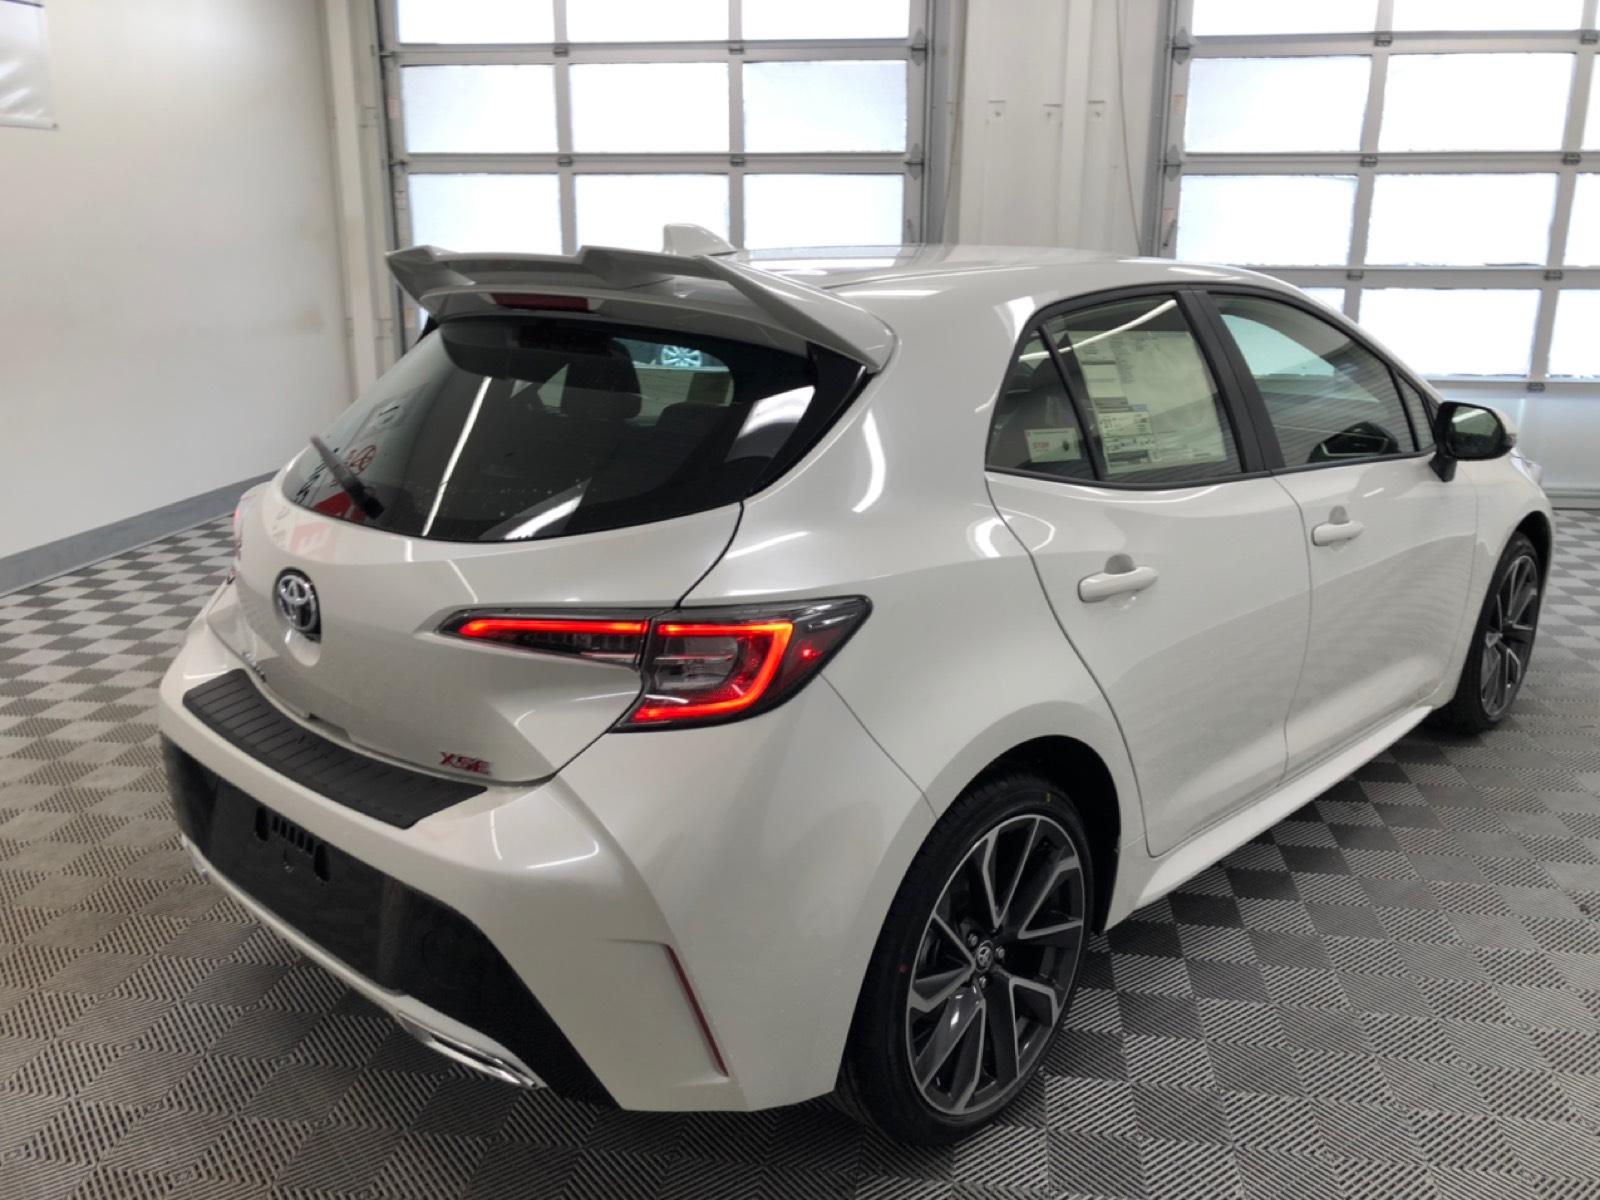 New 2020 Toyota Corolla Hatchback XSE Manual 4dr Car in T60908 Wilde